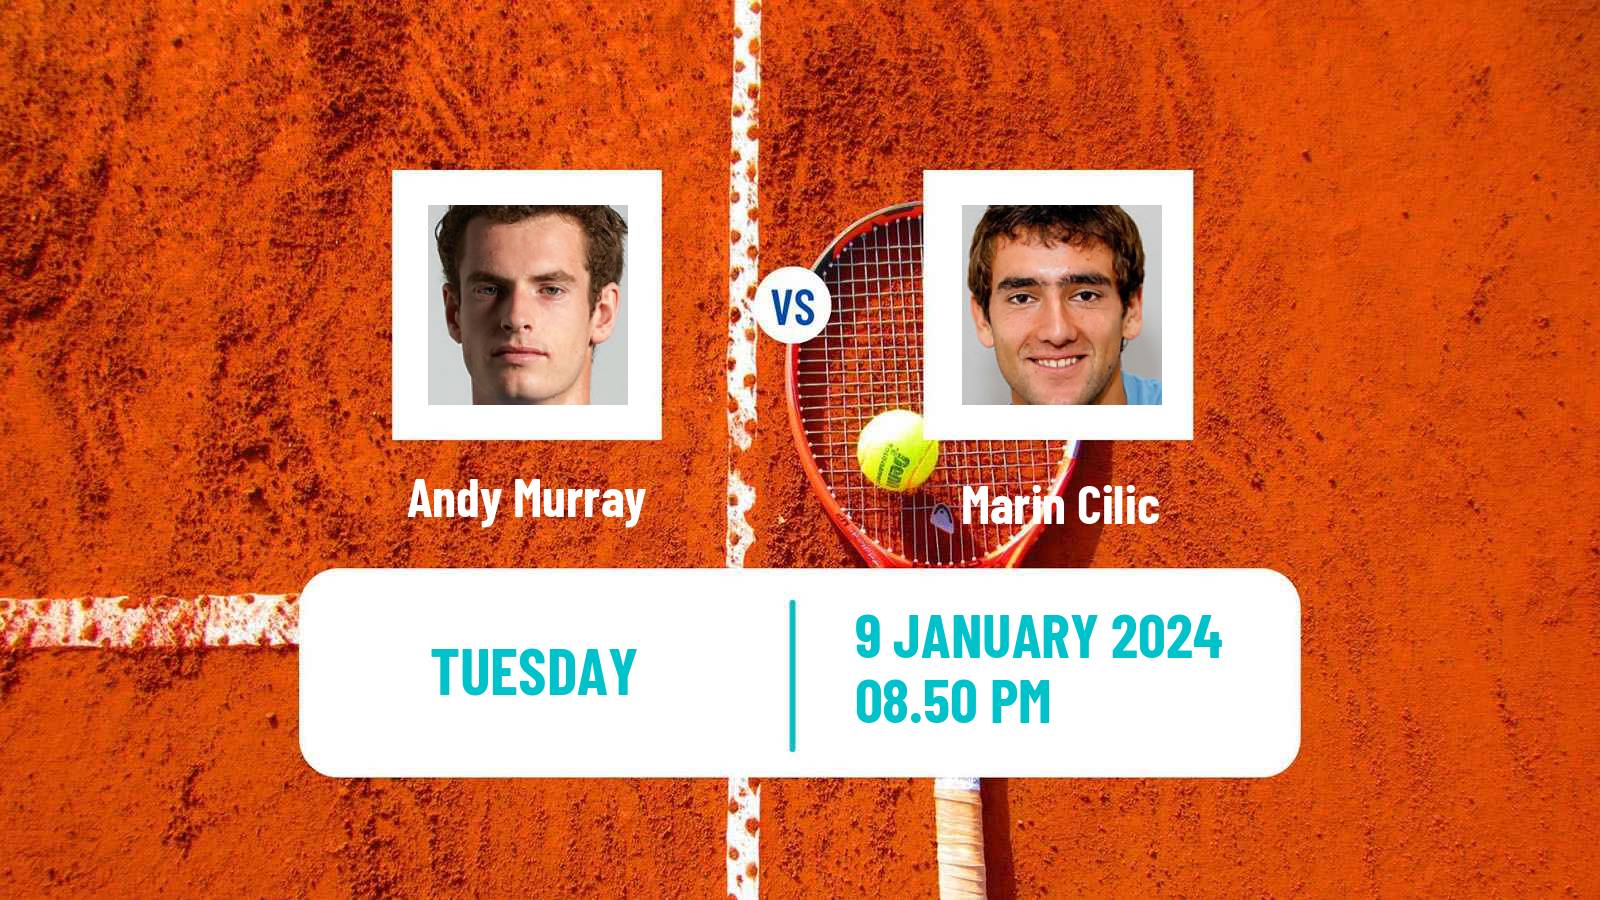 Tennis Exhibition Others Matches Tennis Men Andy Murray - Marin Cilic